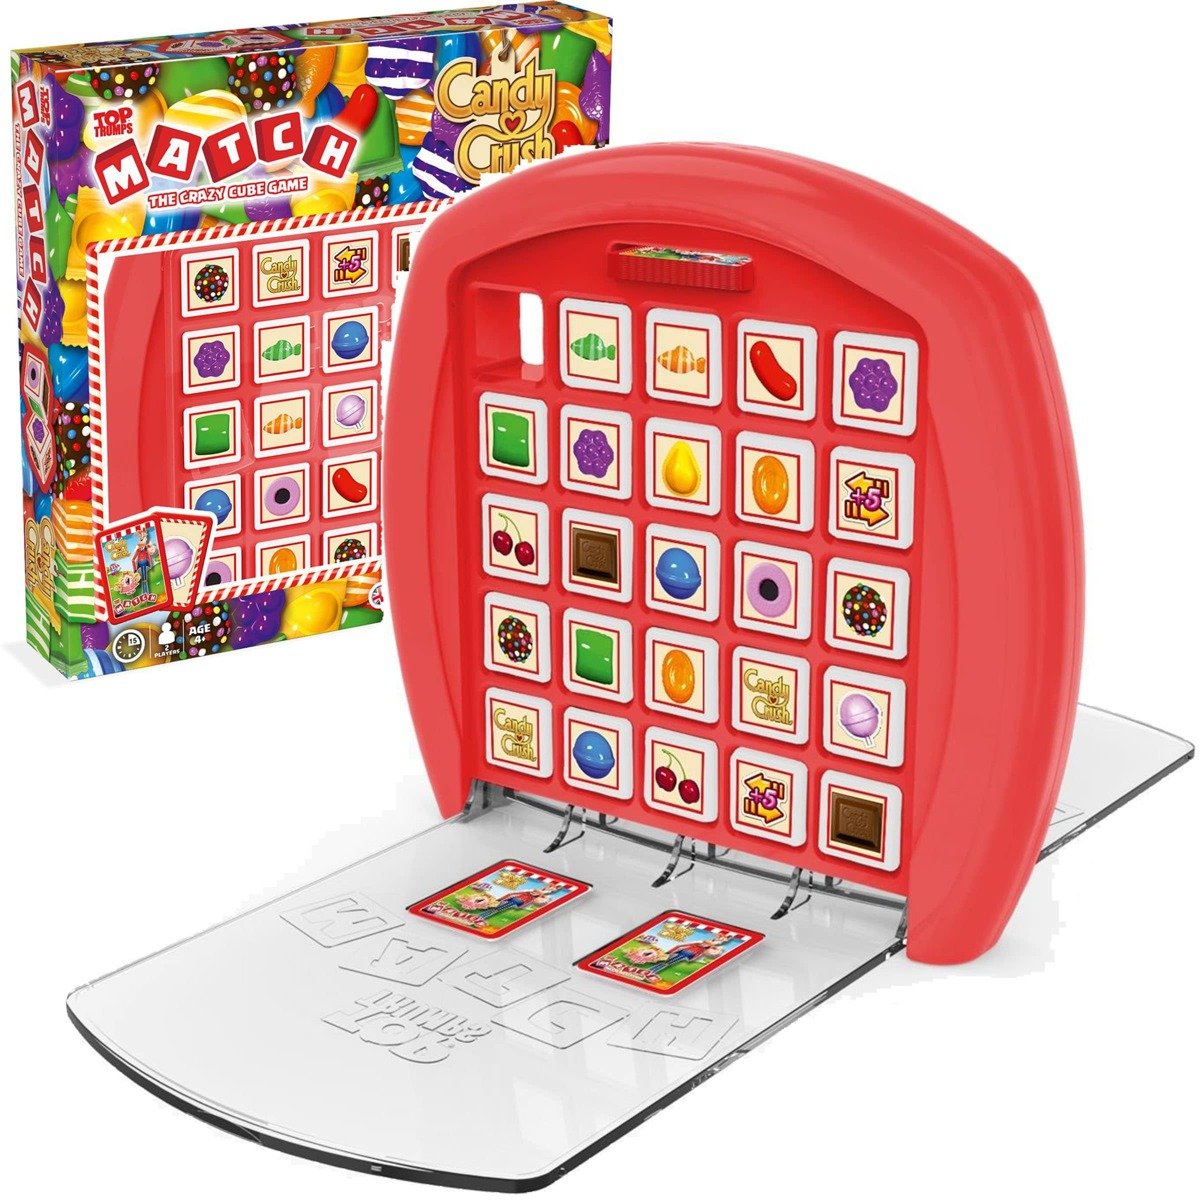 OUTLET Winning Moves TOP TRUMPS Match Candy Crush